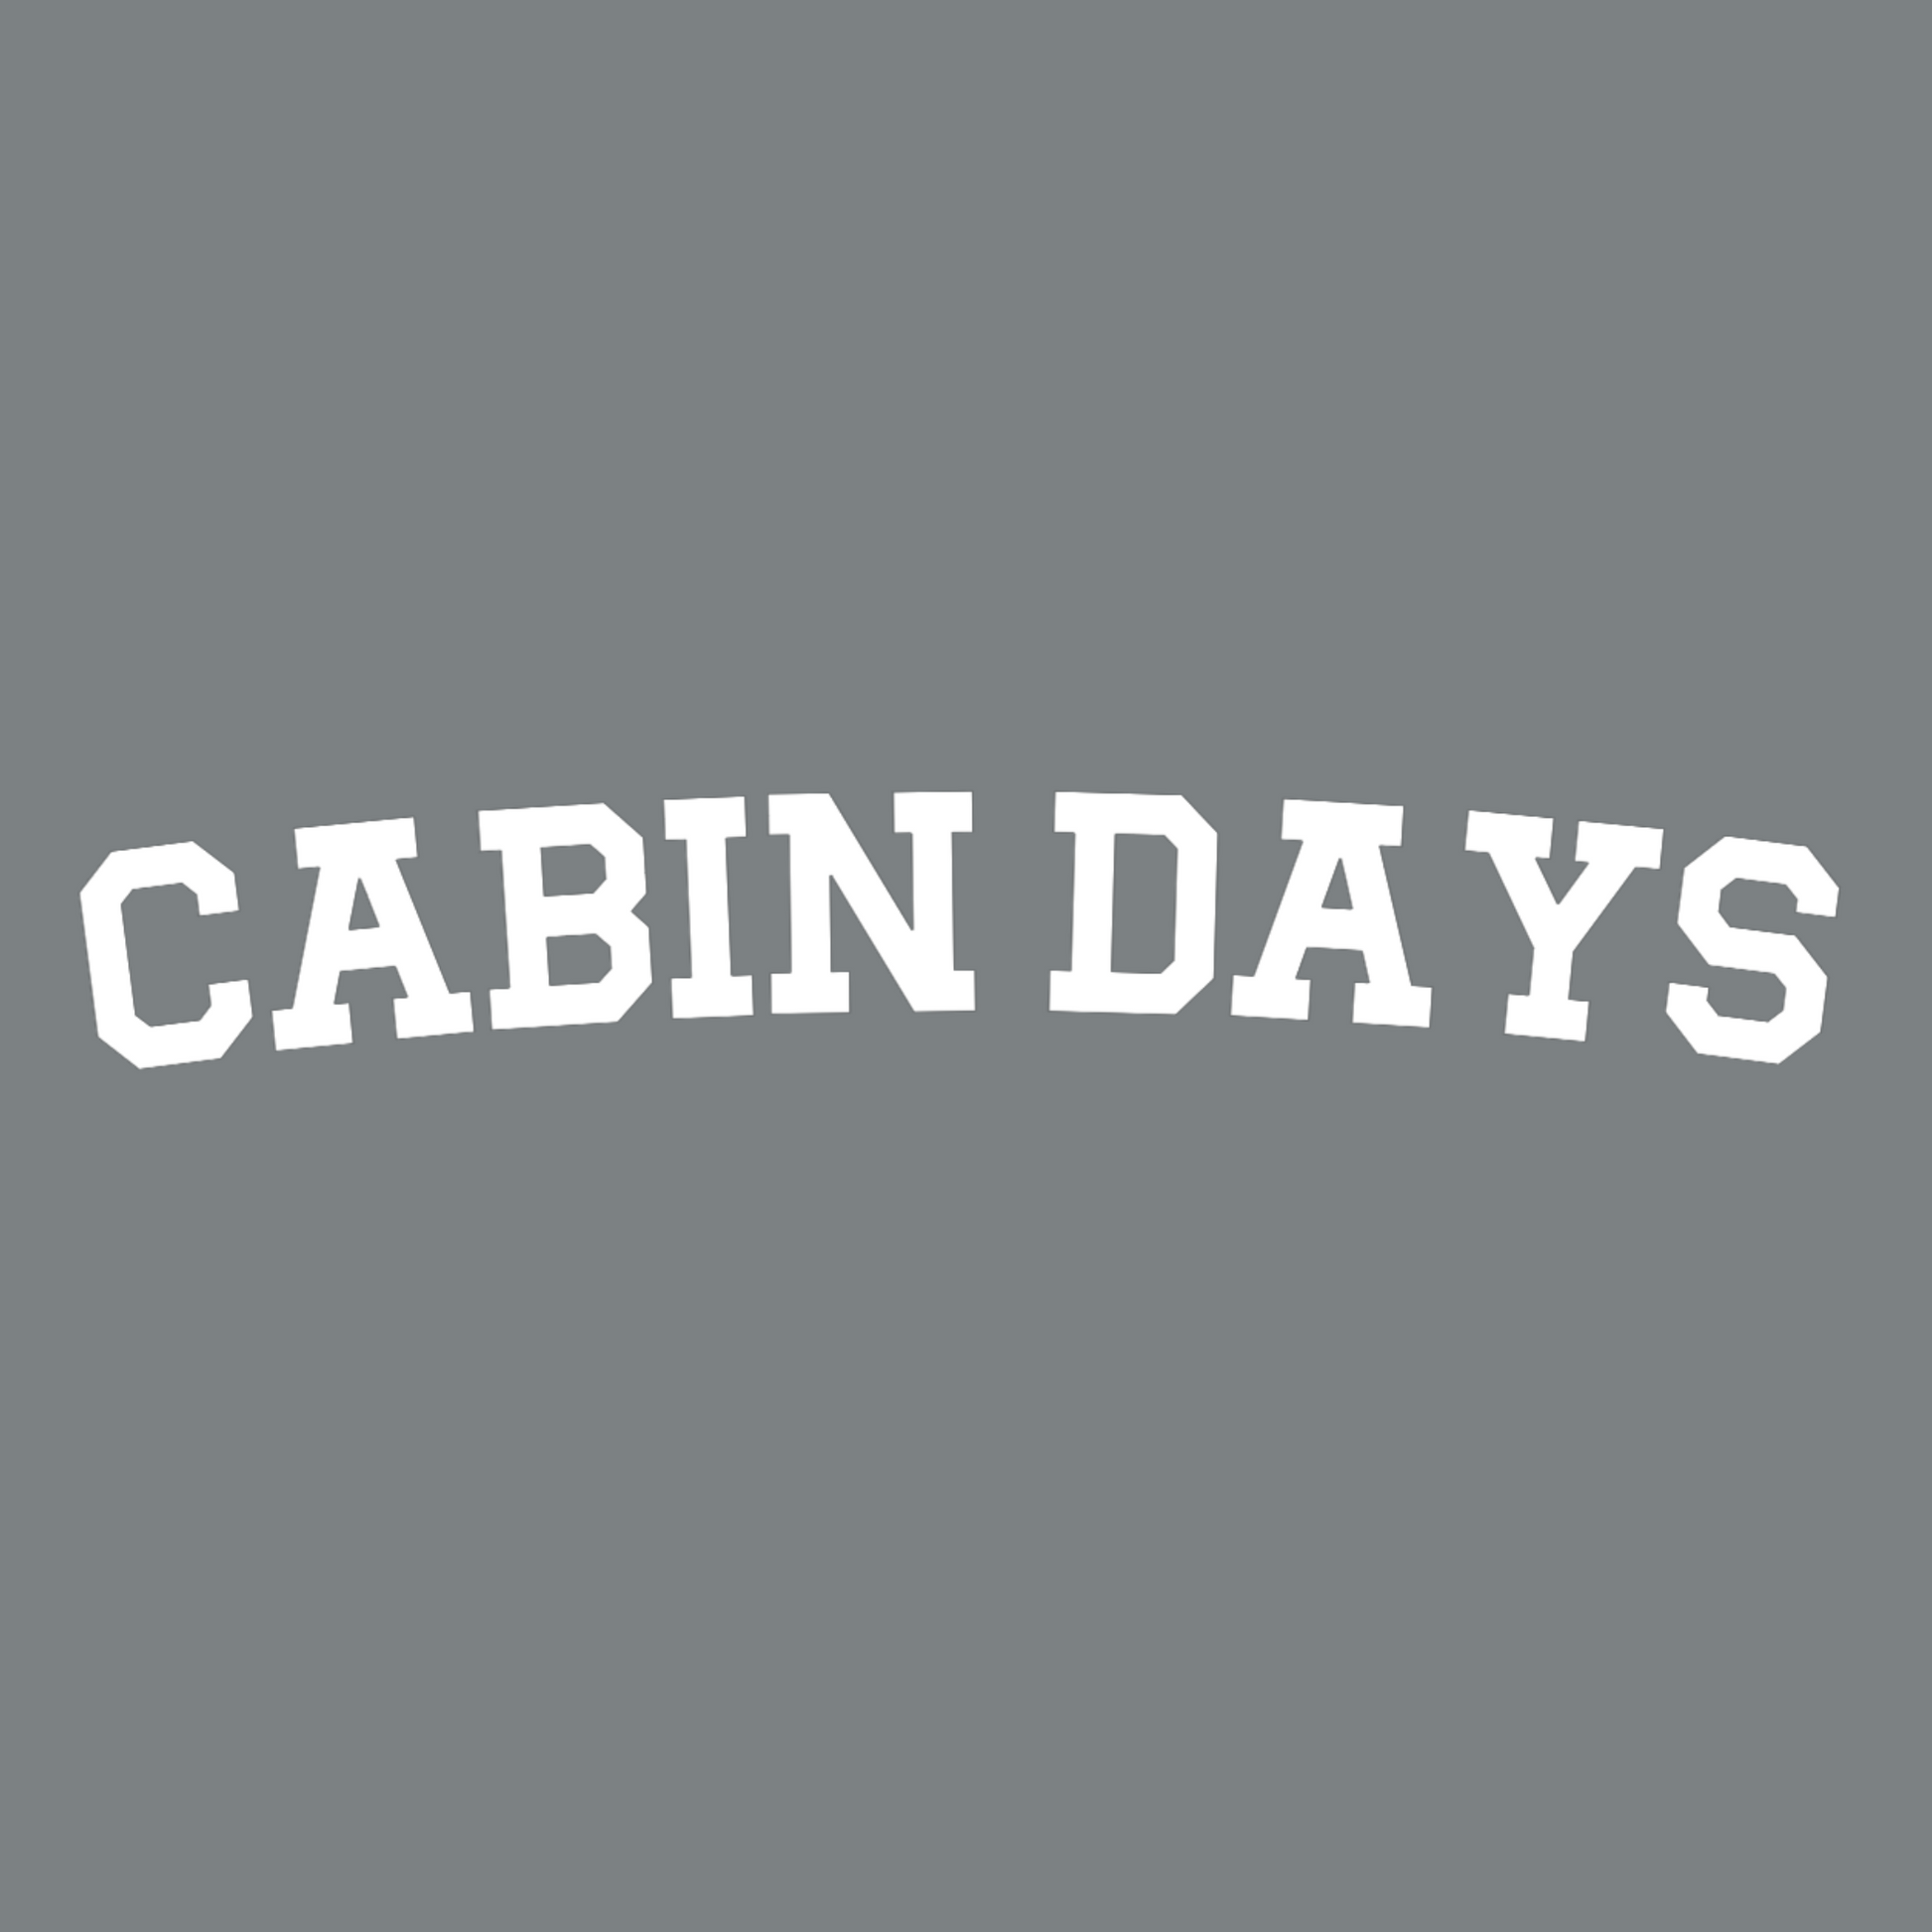 Cabin Days Design white on a gray background.